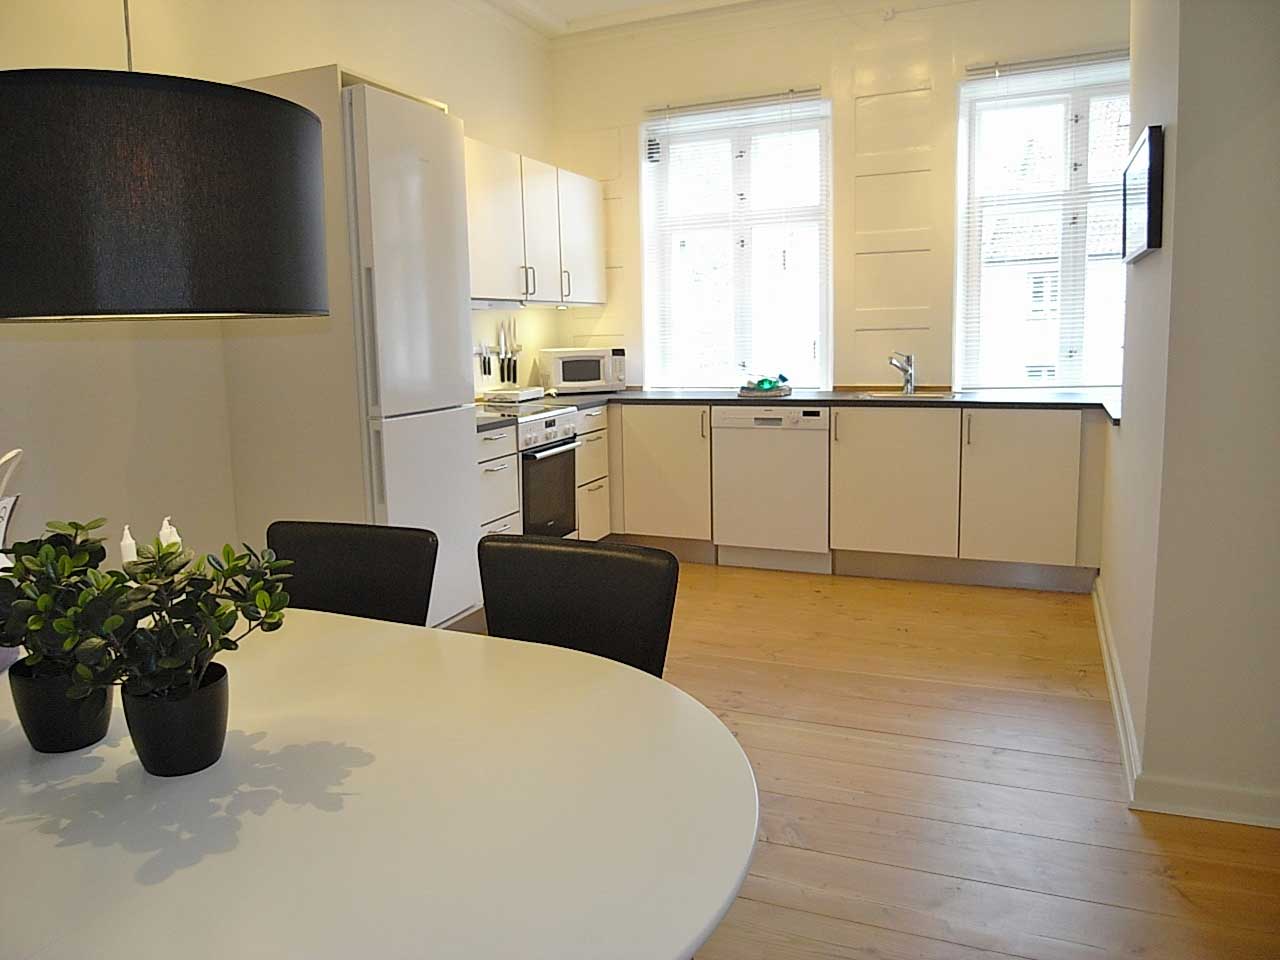 1012 – Great two room apartment Købmagergade